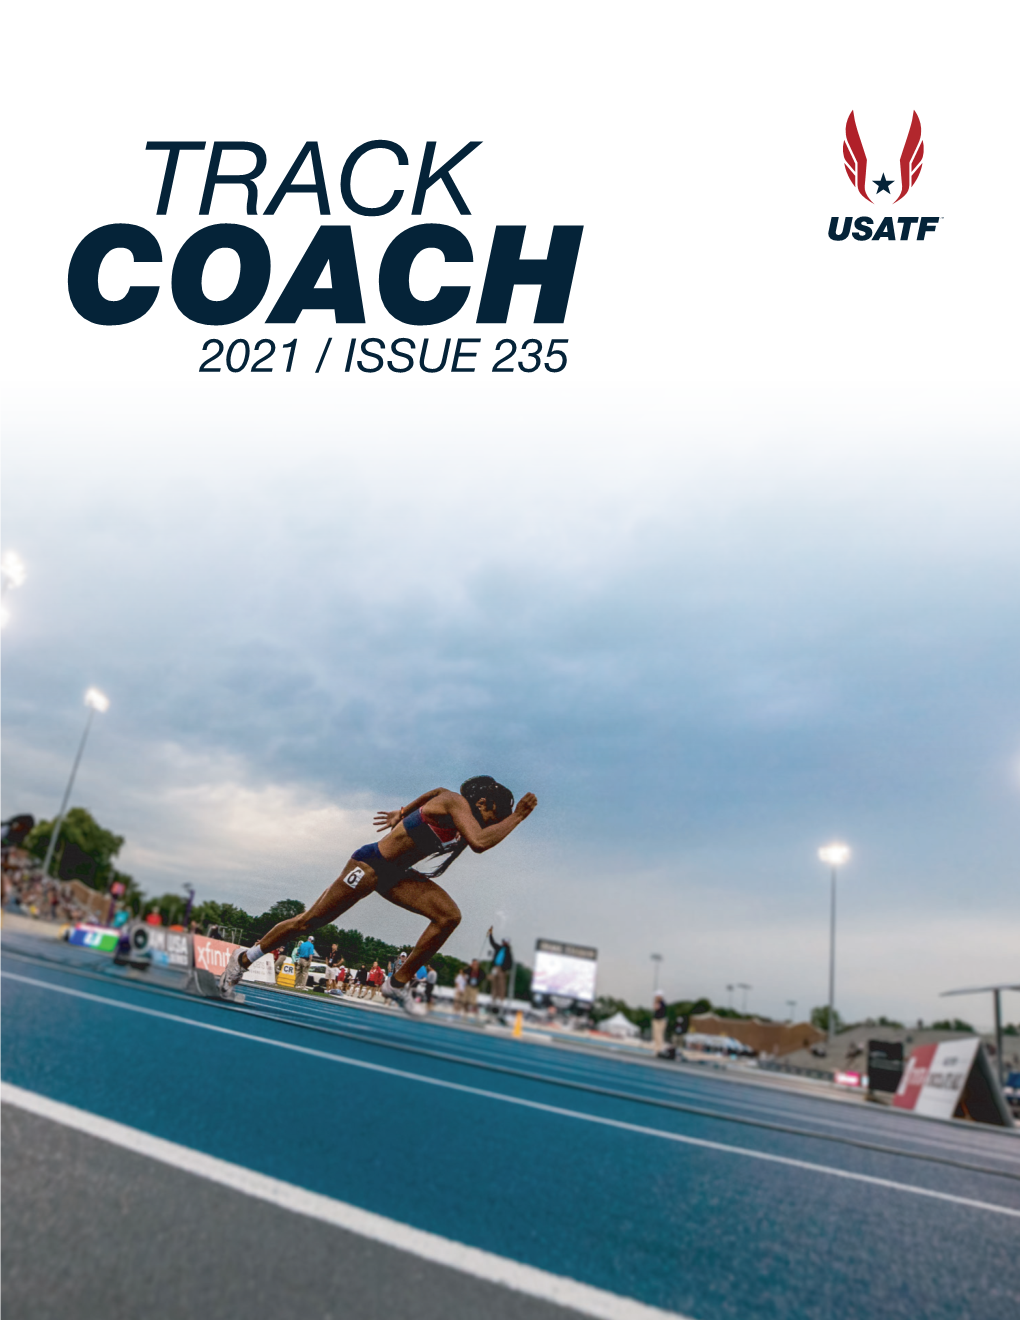 2021 / Issue 235